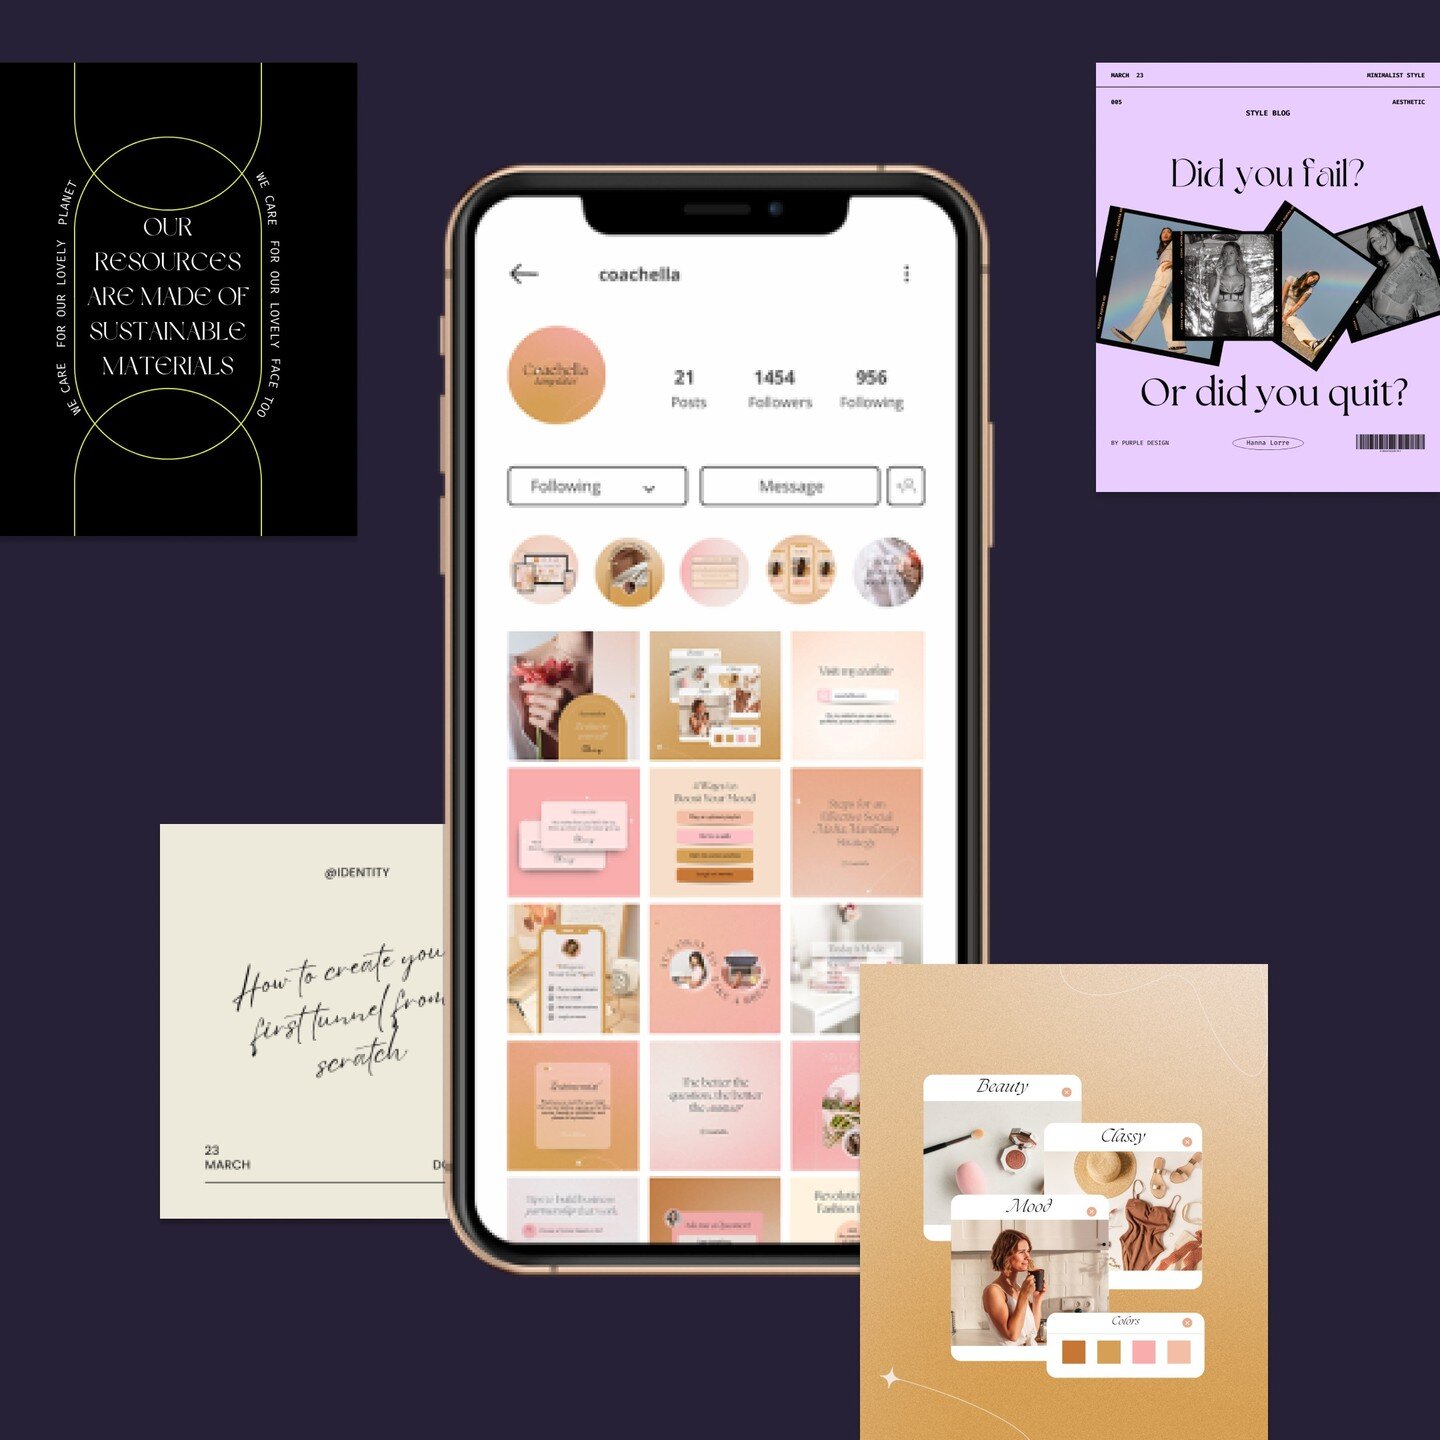 Check out the designs that hit the shop today! 

Enjoy a special launch discount - get a pack of beautifully designed and strategic social media templates for $19 (instead of $29).

Each pack includes:
✨ 20 Instagram templates (1080x1350)
✨ 6 reel co